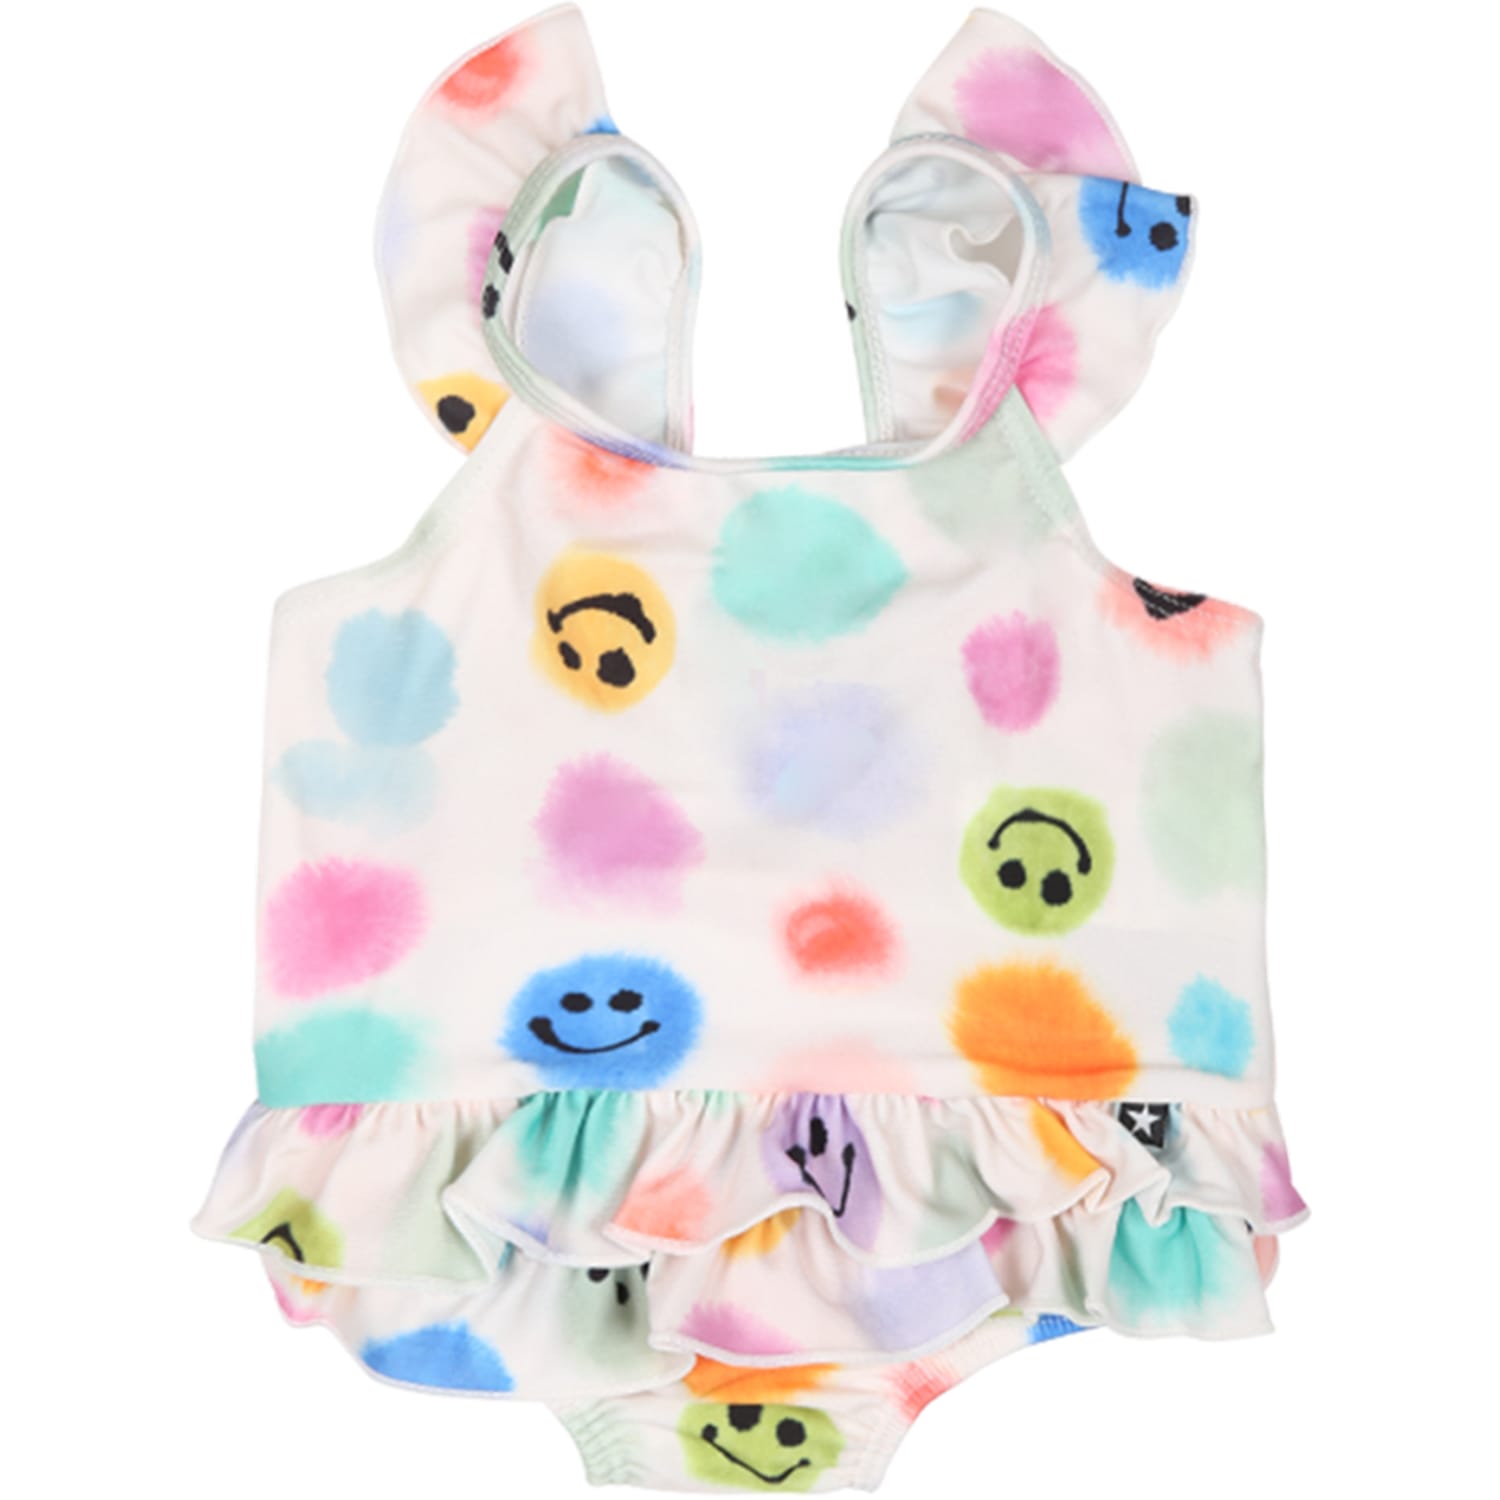 Molo Kids' White Swimsuit For Baby Girl With Polka Dots And Smile In Multicolor